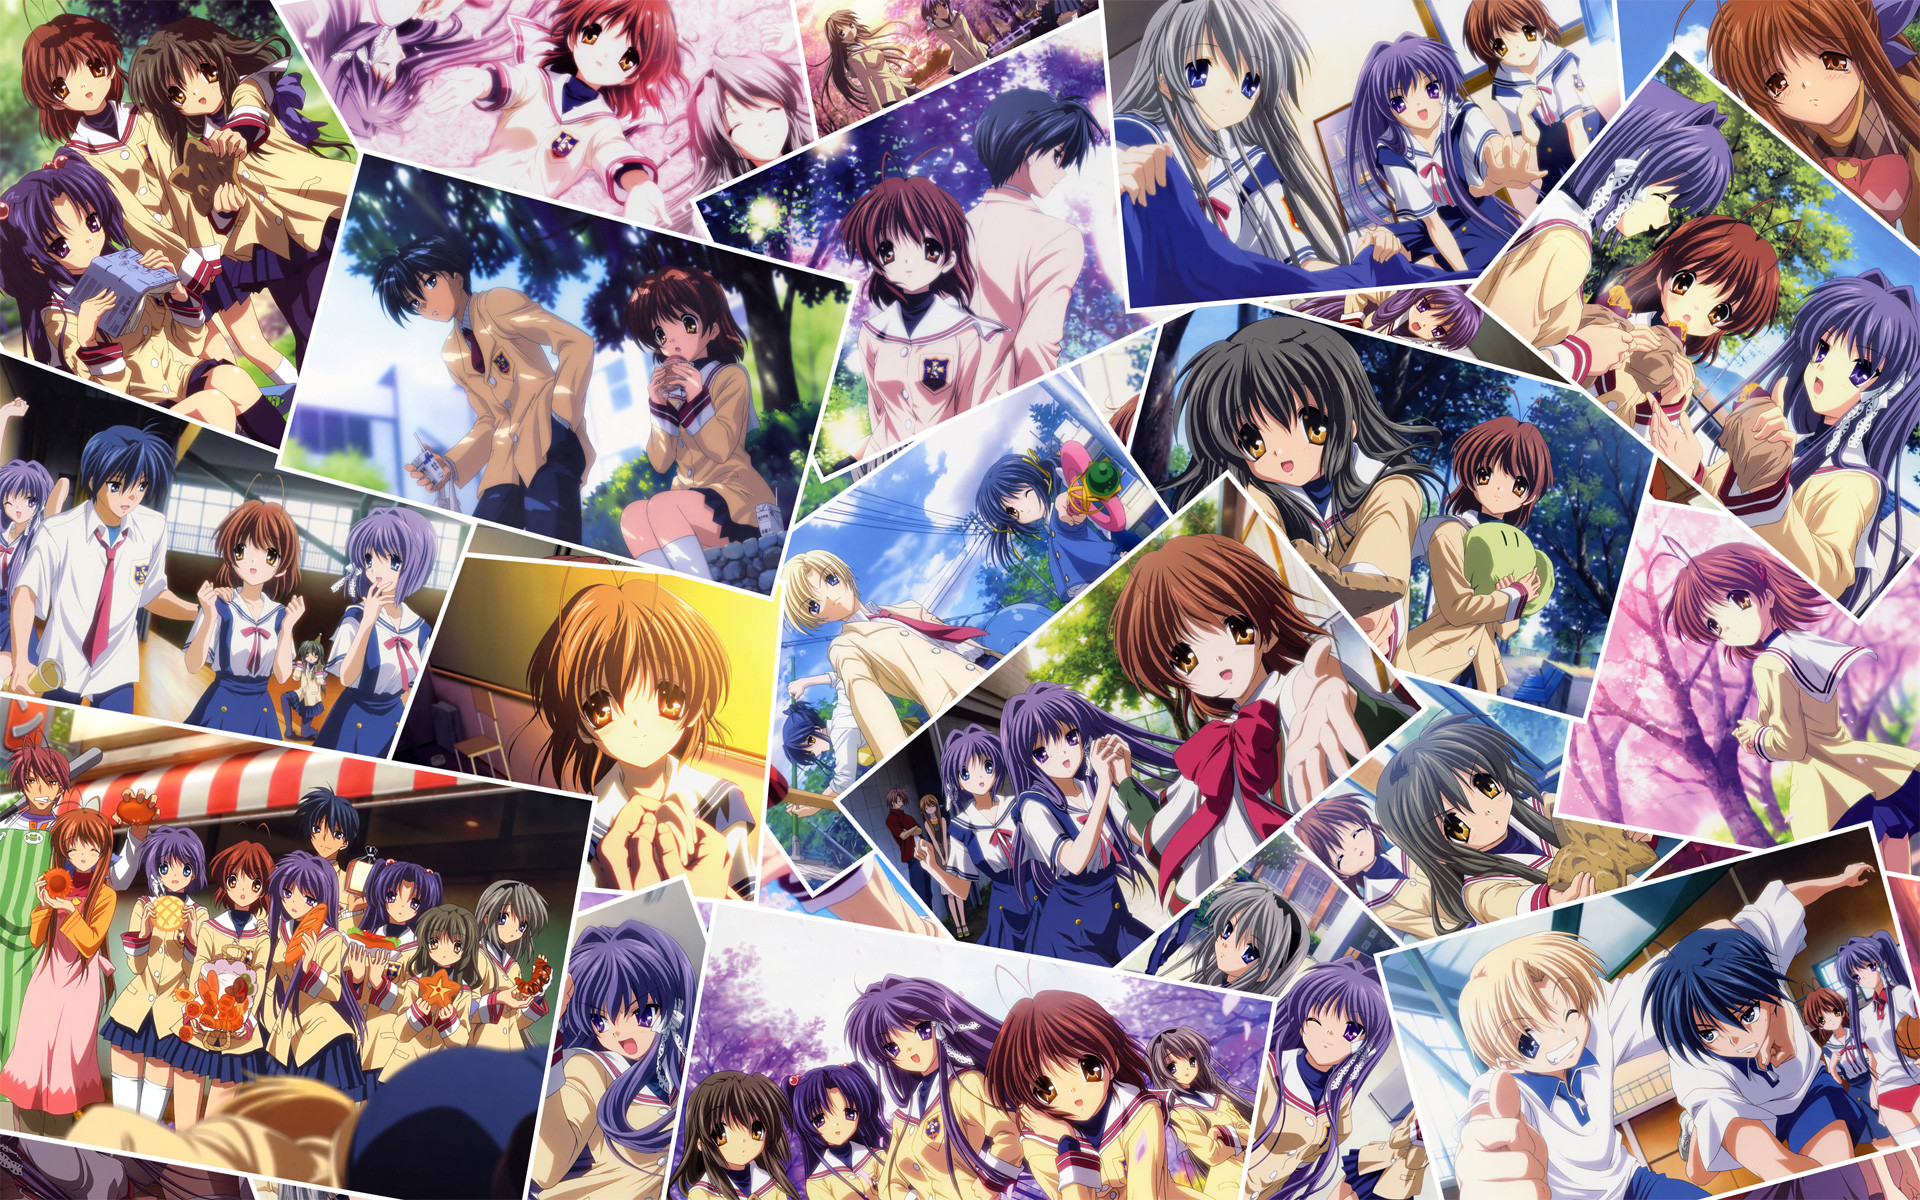 1920x1200 Clannad and Clannad After Story images Clannad Memories HD wallpaper and  background photos